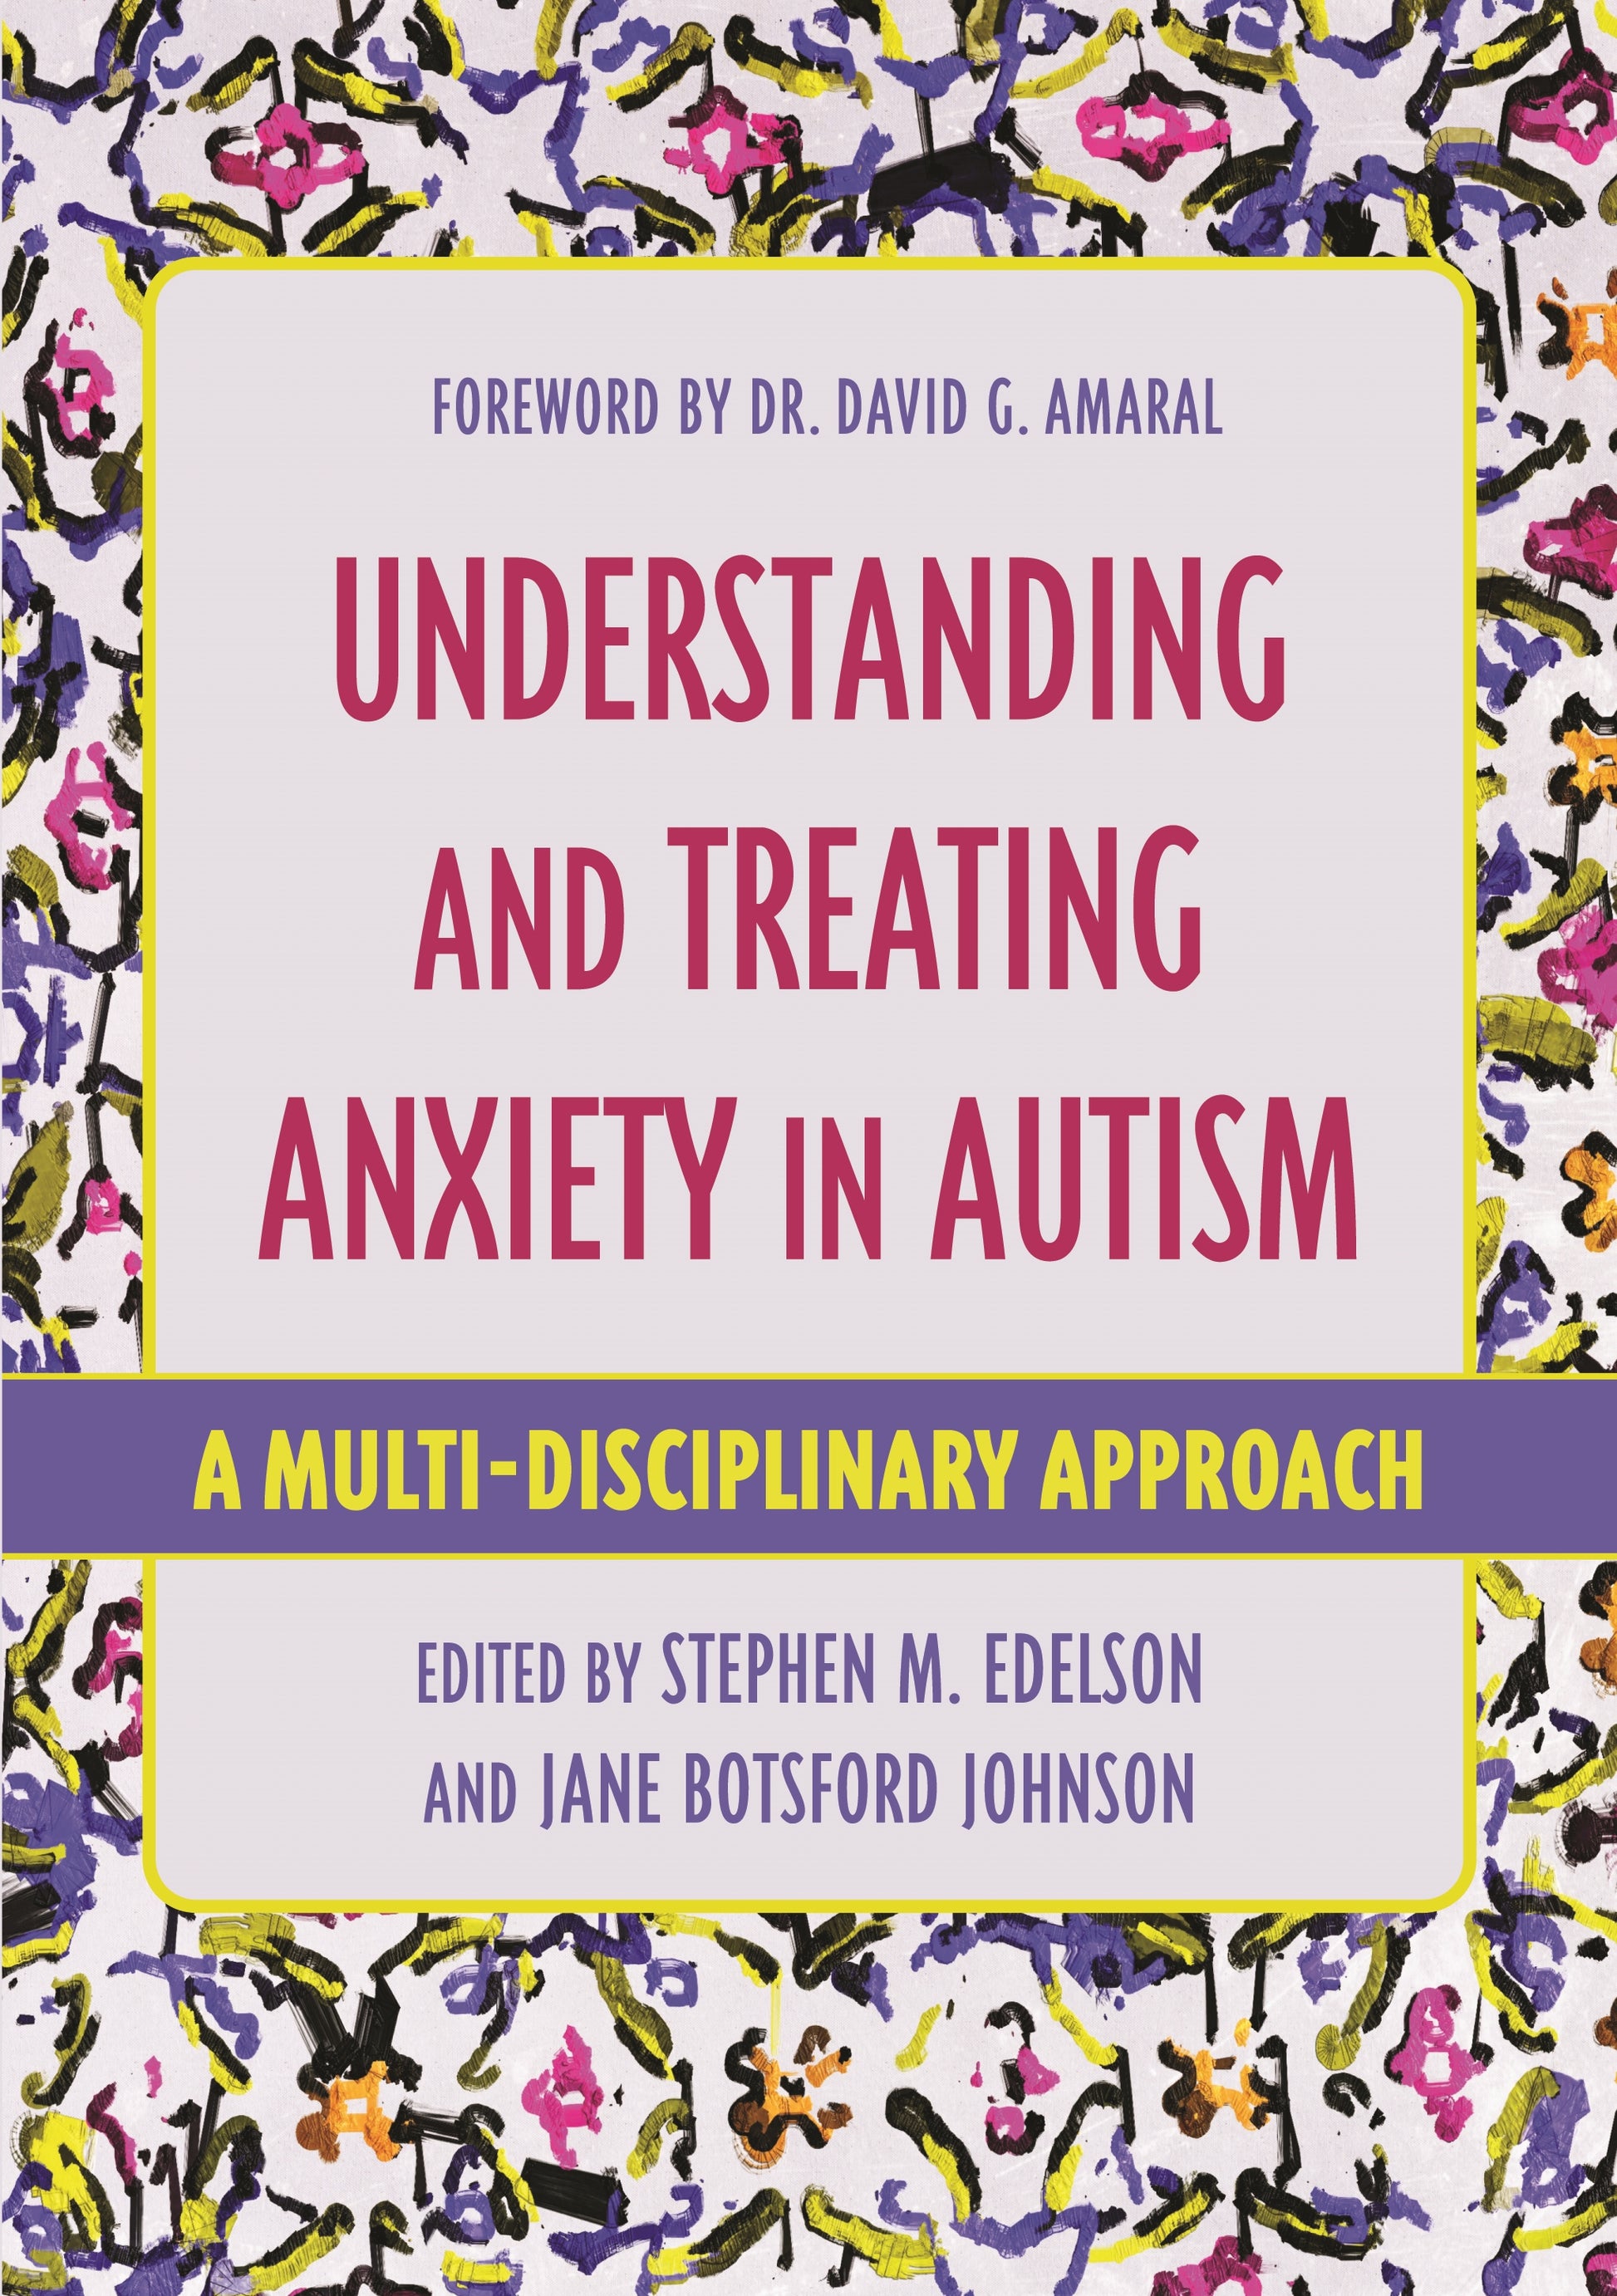 Understanding and Treating Anxiety in Autism by Stephen M. Edelson, Jane Botsford Johnson, David Amaral, No Author Listed